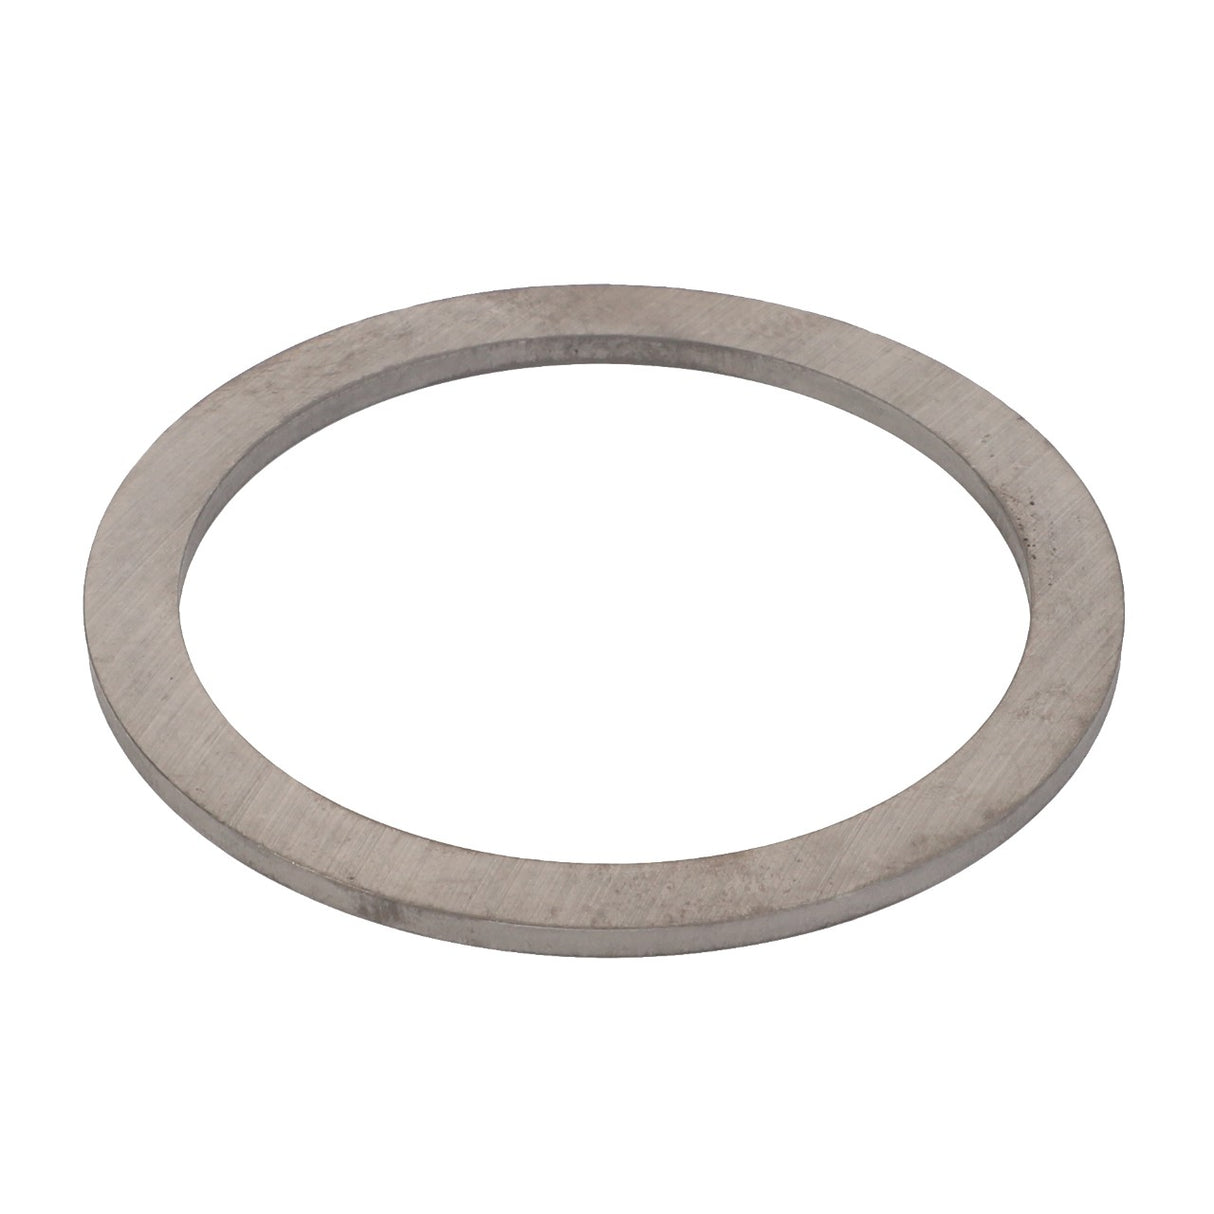 AGCO | Spacer Washer - F180101320180 - Farming Parts